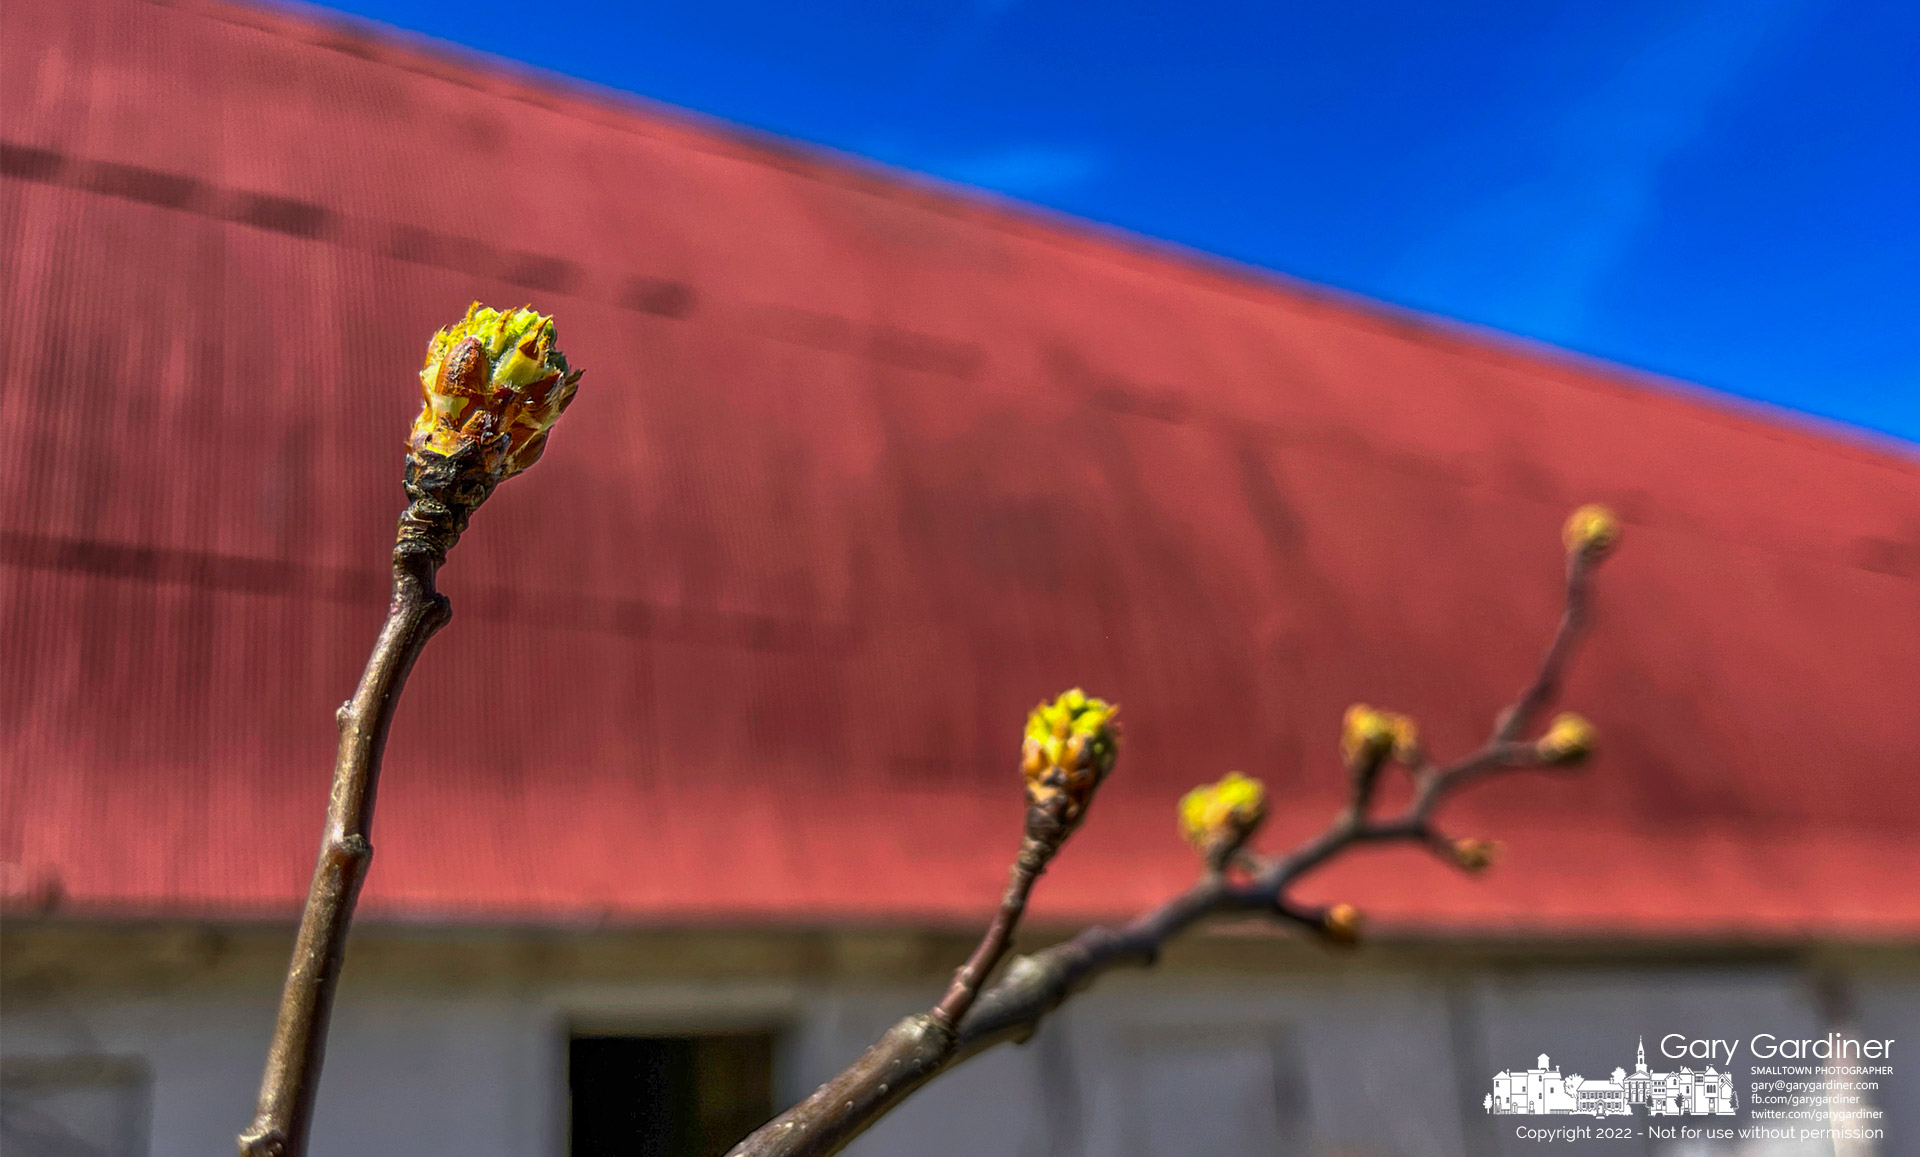 The first buds of Spring sprout from branches of the invasive Callery pear on the small hill behind the barn at the Braun Farm. My Final Photo for March 21, 2022.